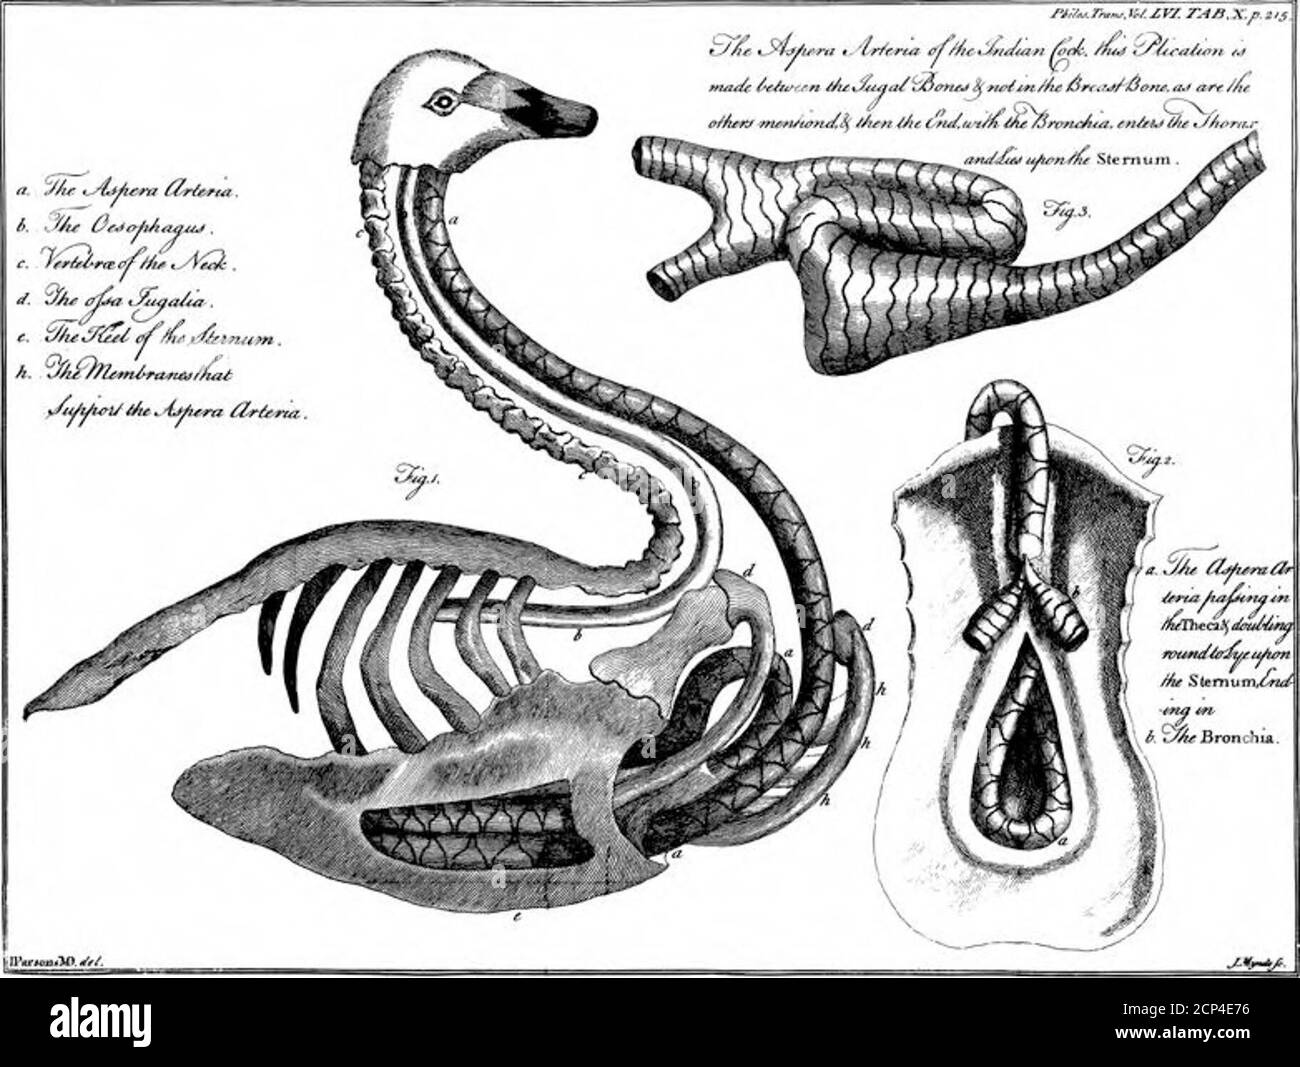 . An Account of Some Peculiar Advantages in the Structure of the Asperae Arteriae, or Wind Pipes, of Several Birds, and in the Land-Tortoise . o comprefs the lungs, permitted it toreturn to its firft fize, and rendered the whole bodyof the tortoife lighter. I have, in many kinds offifh, differed their fwimming bladders, and foundthat in great and fmall thefe are vefted with a ftrongmufcular membrane, which they are capable ofcontraflirig and dilating at will, whereby they areable to comprefs or expand the column of air withinvery confidcrably: this bears fbme analogy to thedetmfor mufcle of th Stock Photo